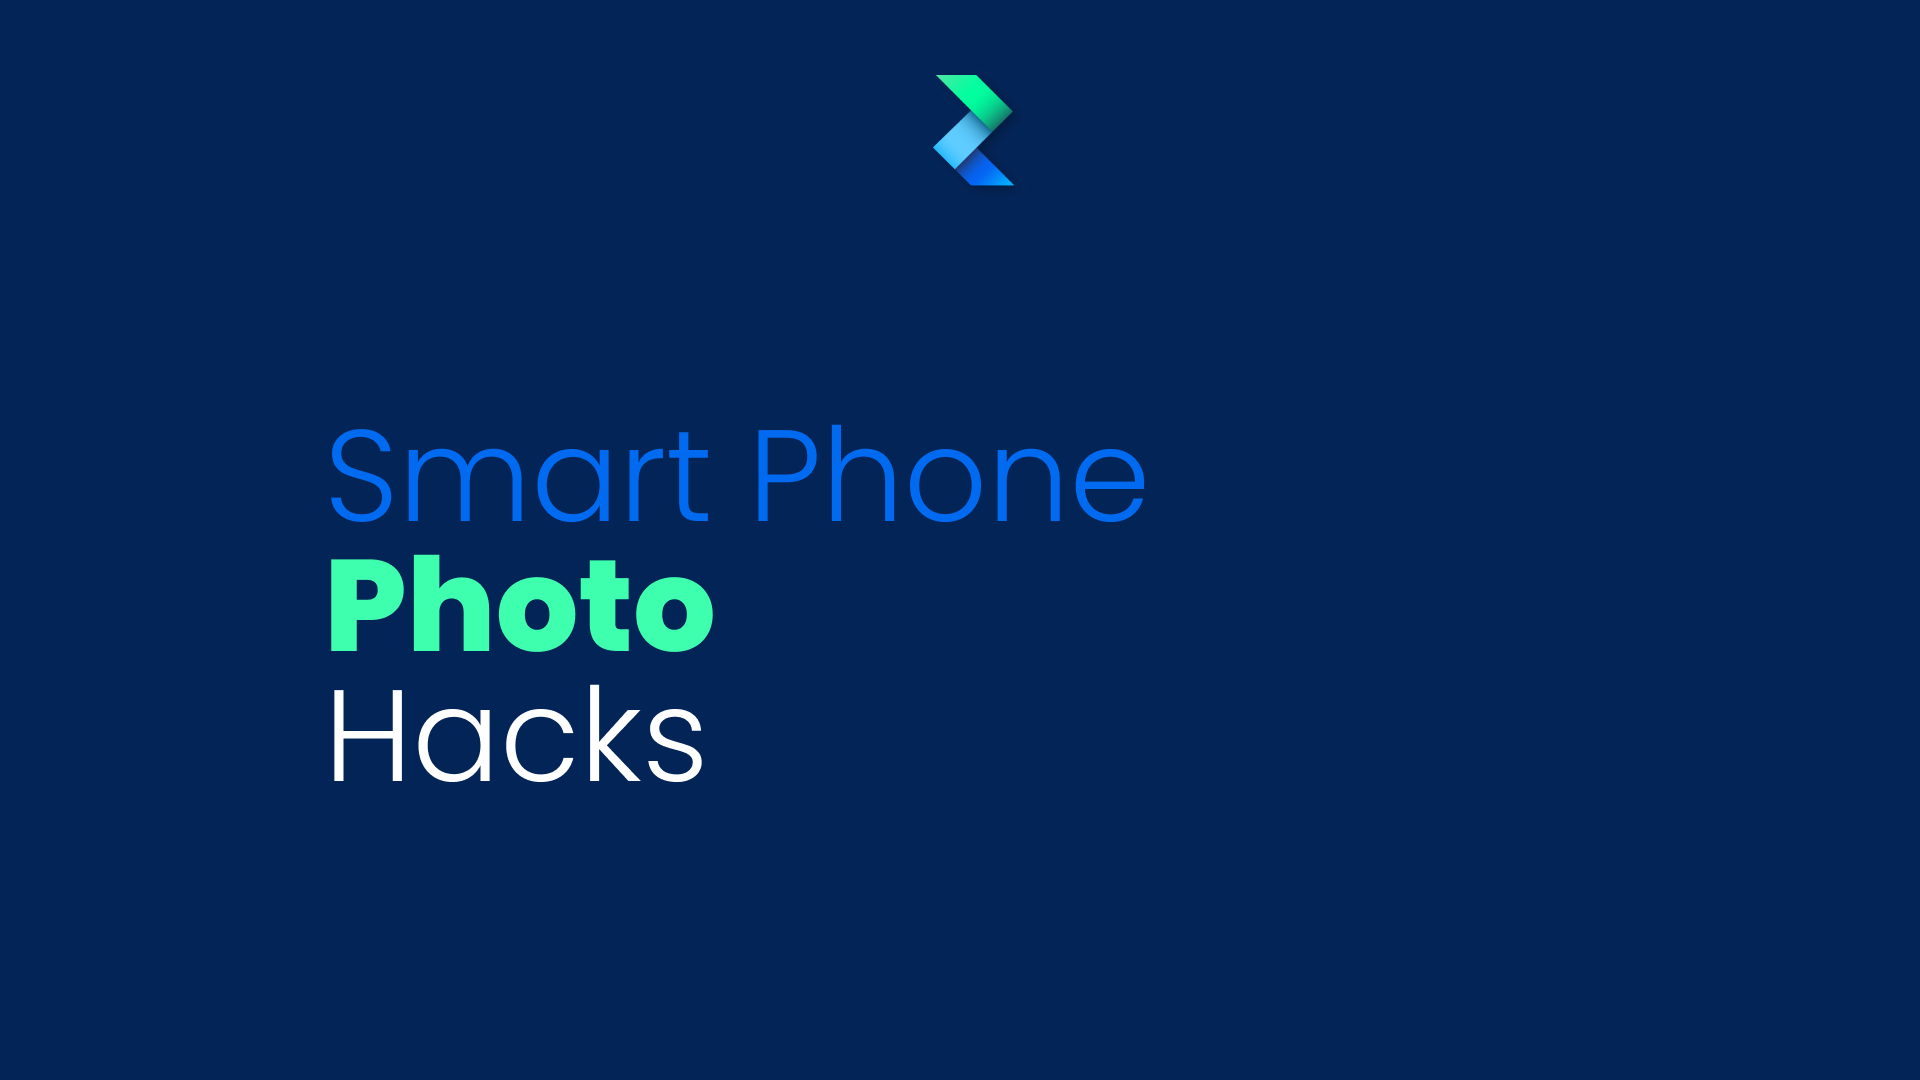 Smartphone Tips for Better Photos